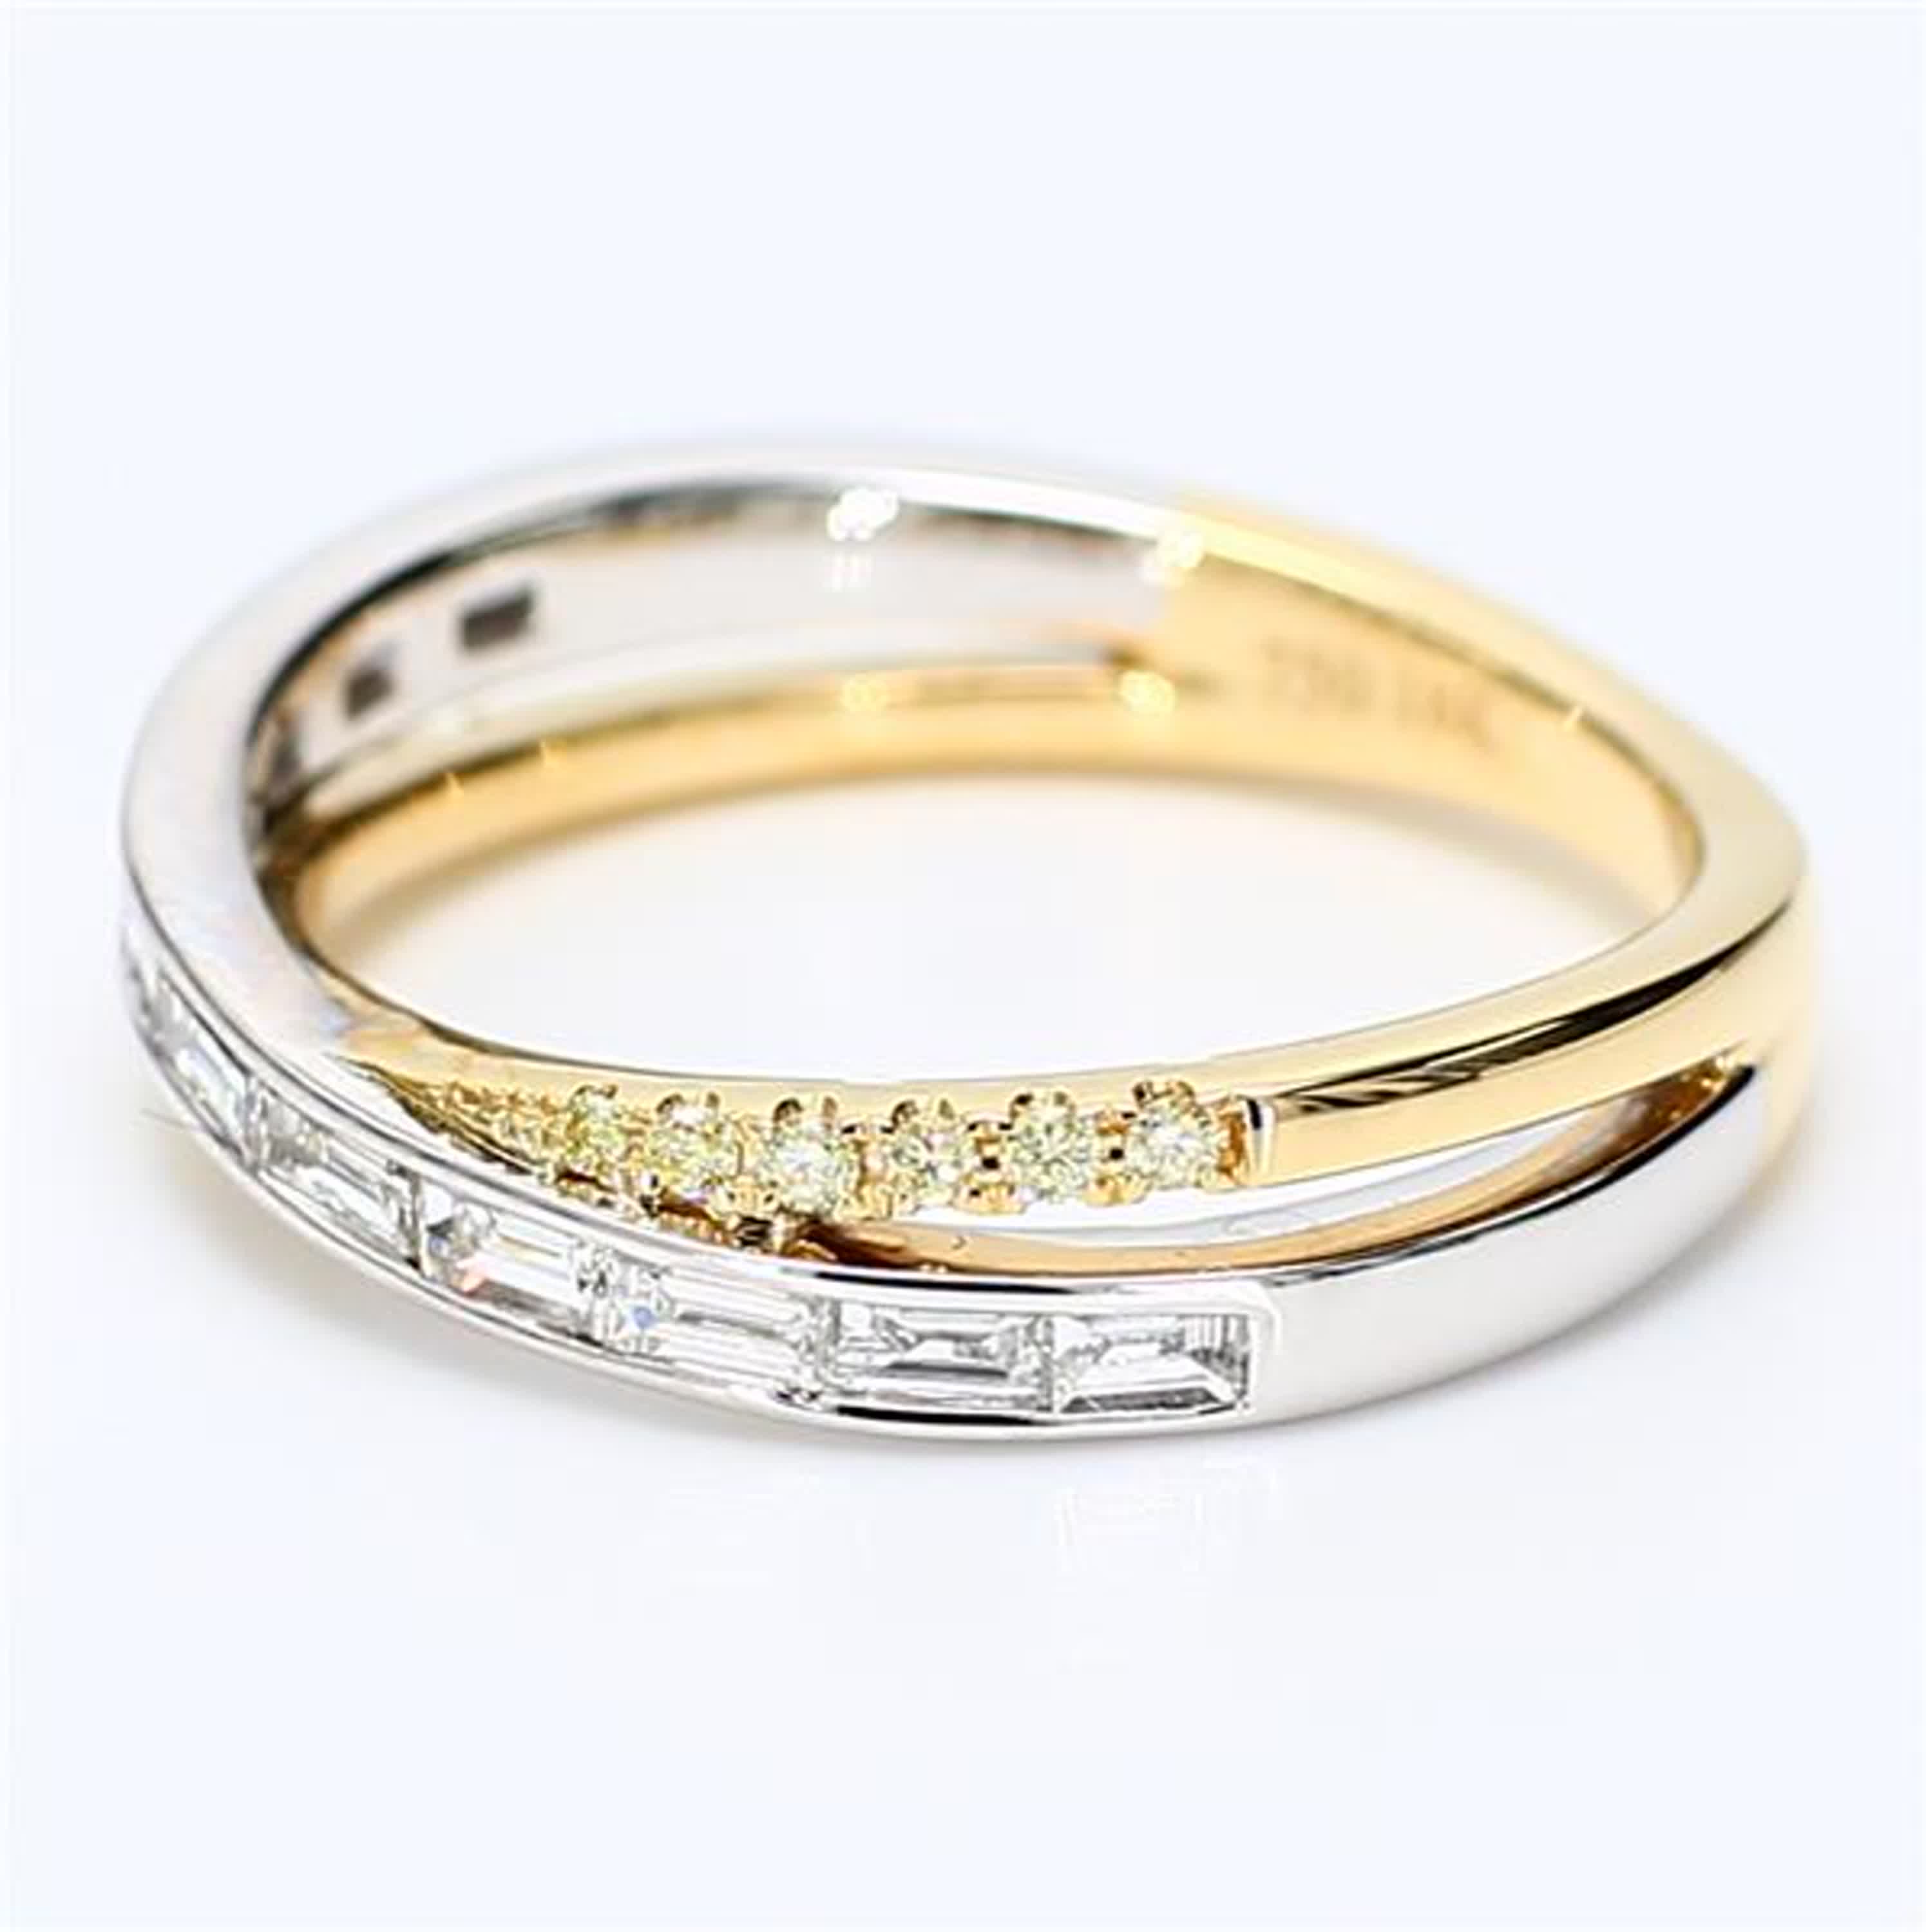 Natural White Baguette and Yellow Diamond .48 Carat TW Gold Wedding Band